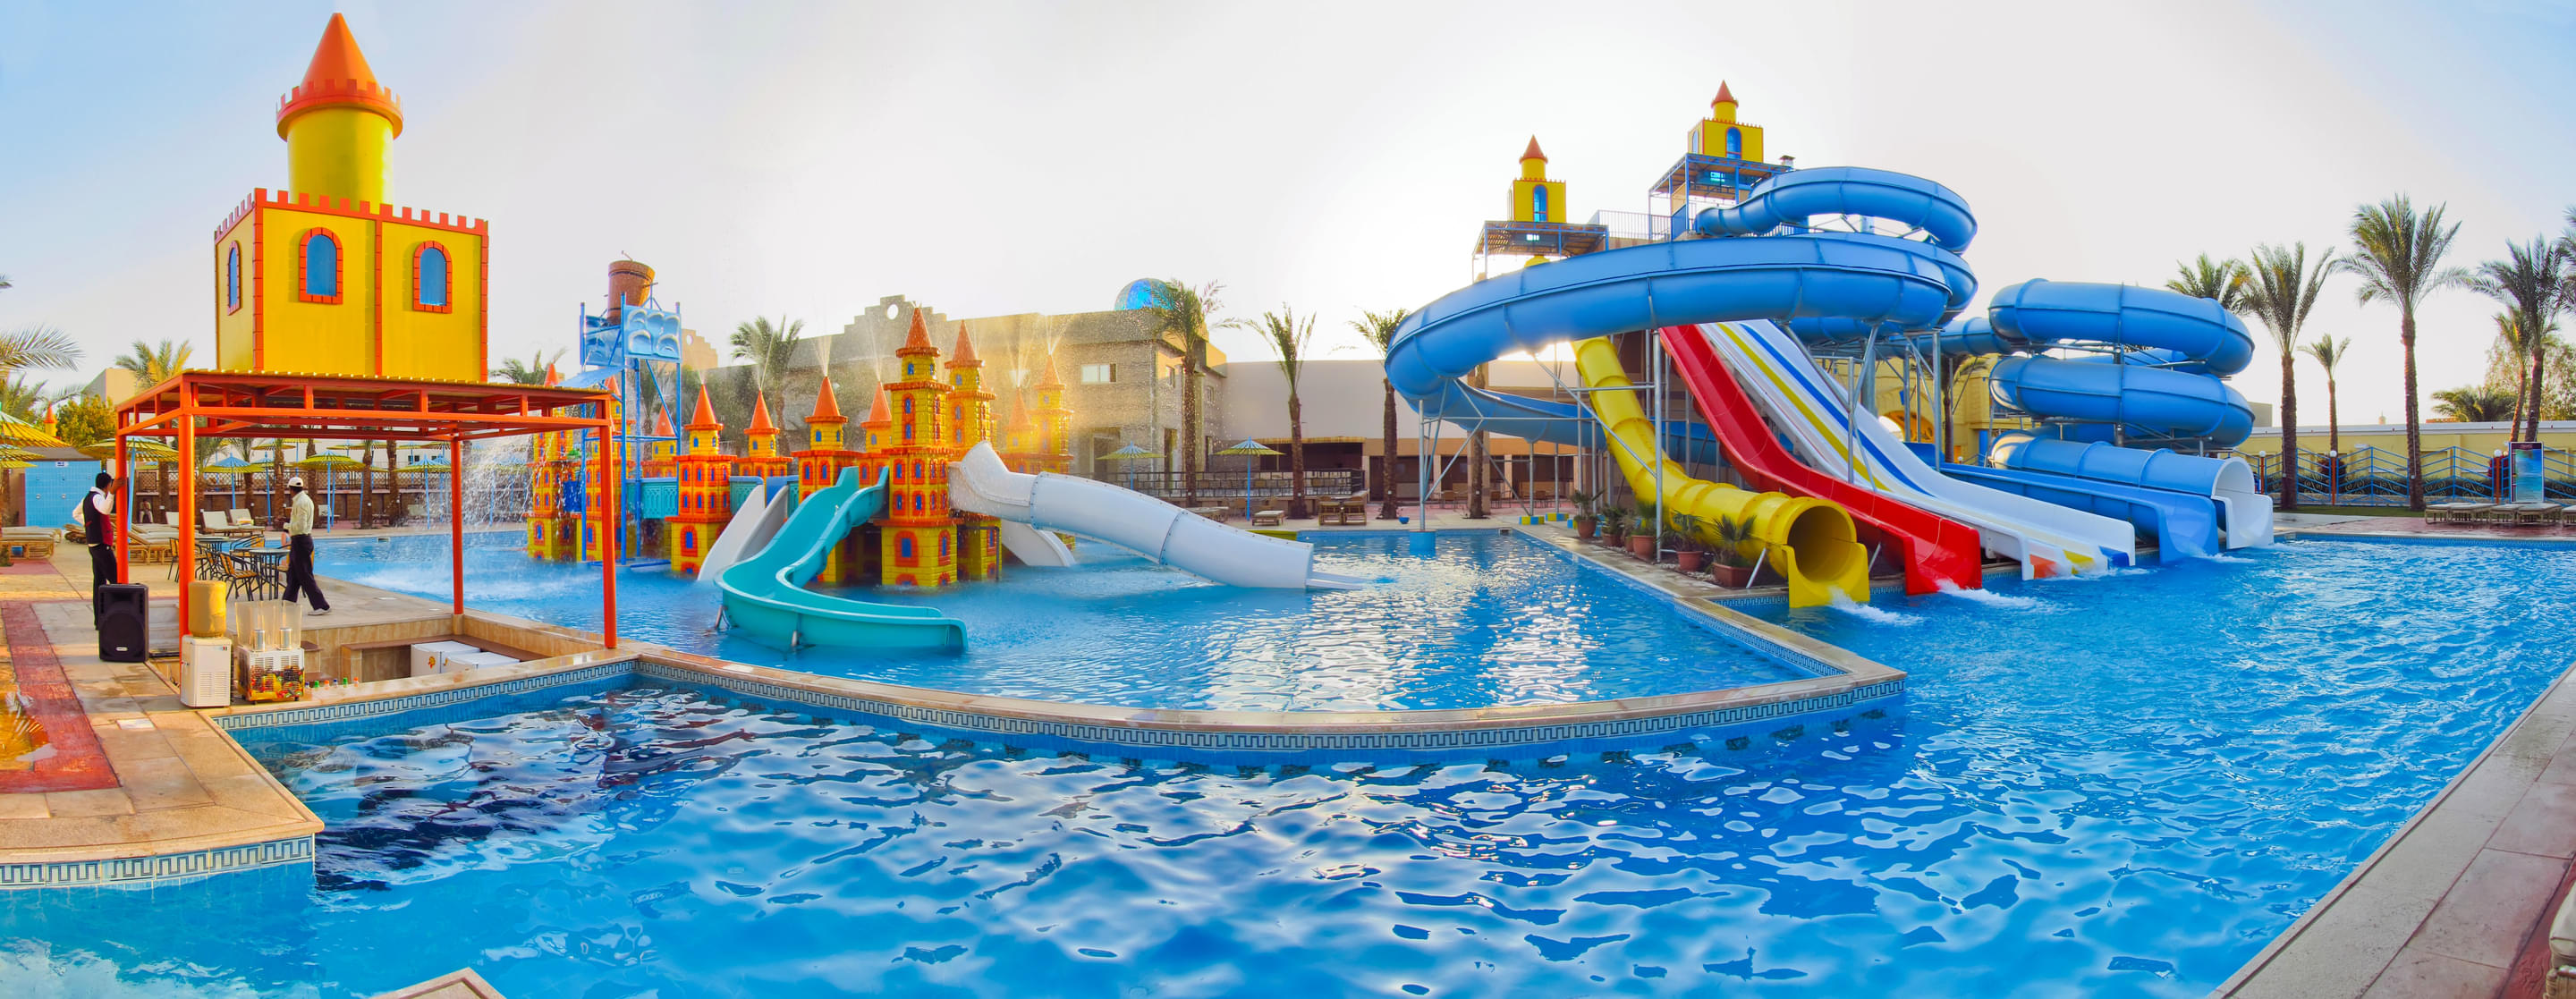 Best Water Parks in India